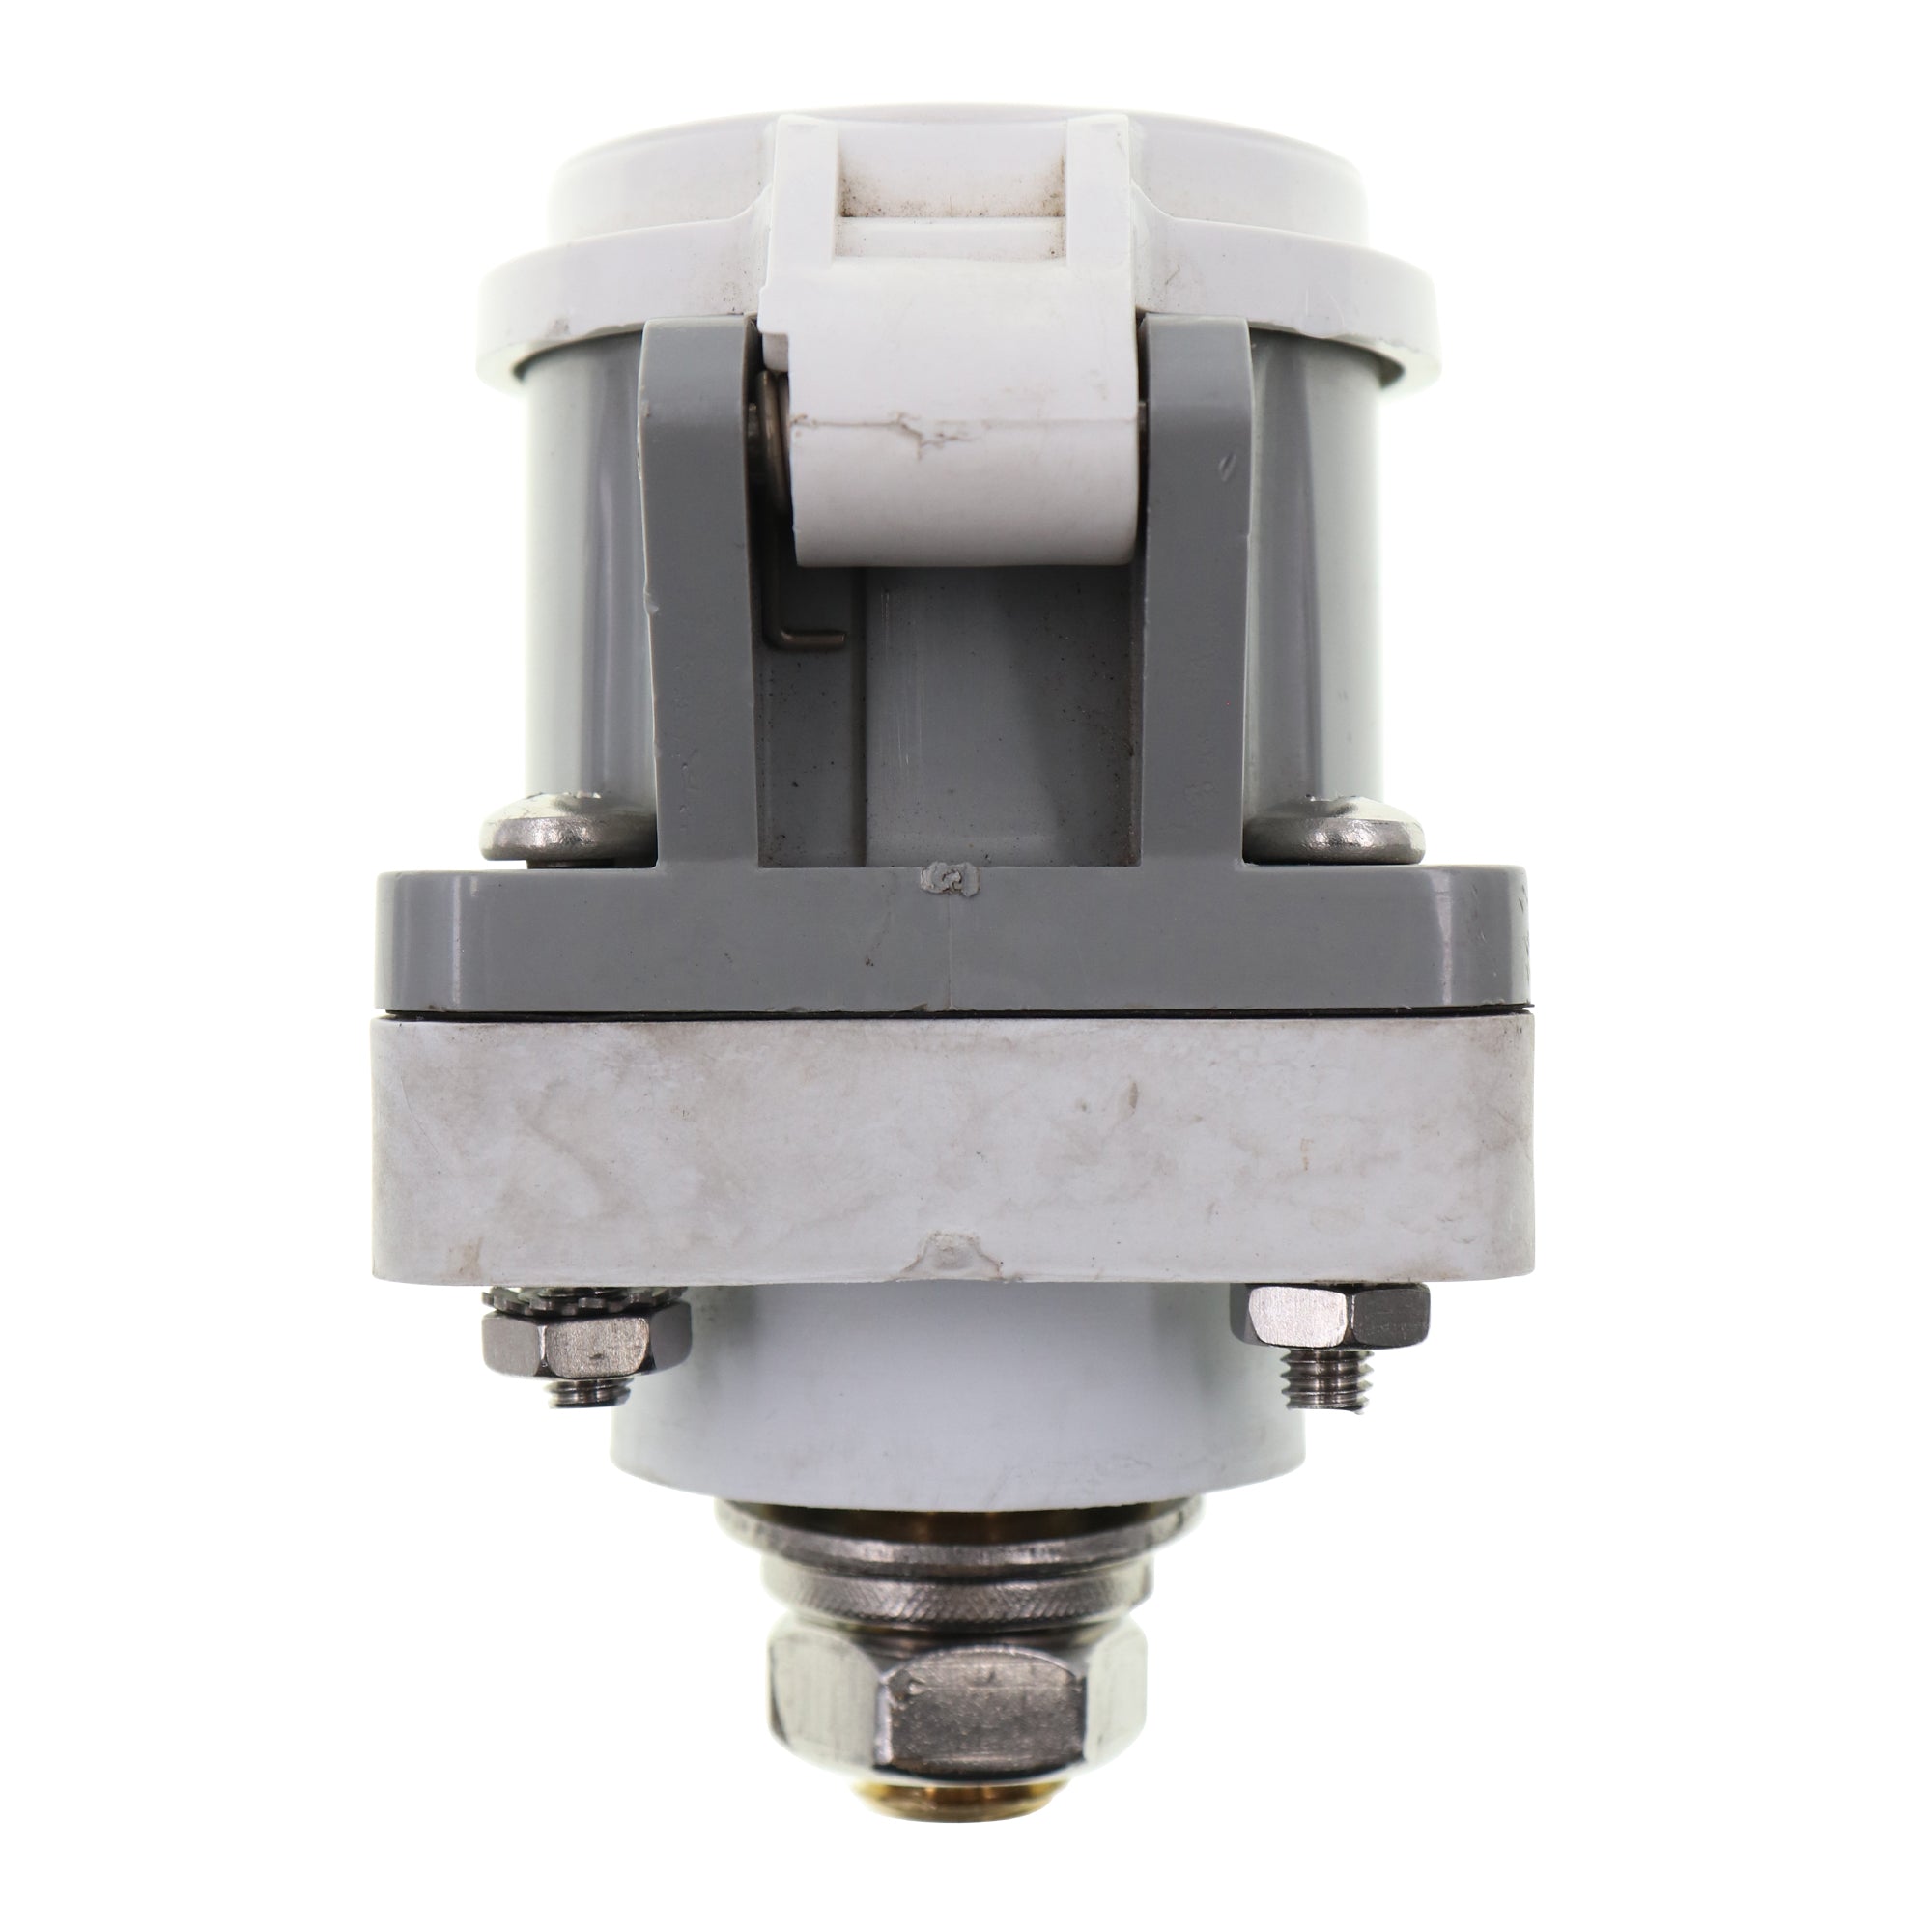 Crouse Hinds, CROUSE-HINDS E1016-1605 + E1016SC-38 J TYPE CAMLOCK MALE RECEPTACLE, 400A, WHITE